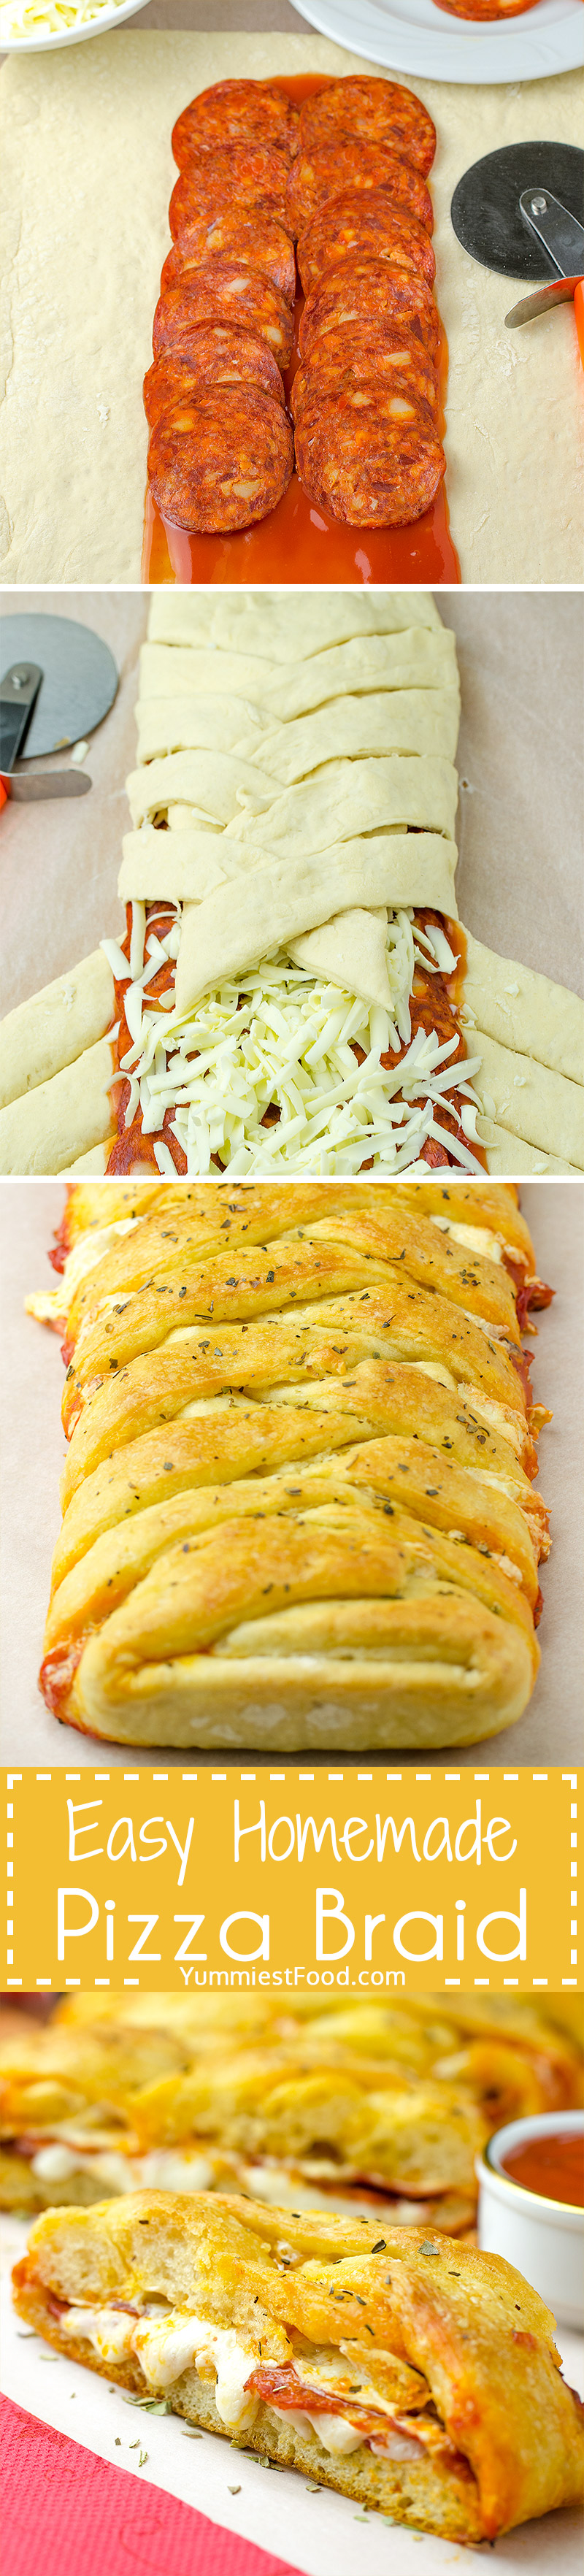 This homemade pizza braid is so quick, easy and delicious you will want to make it again